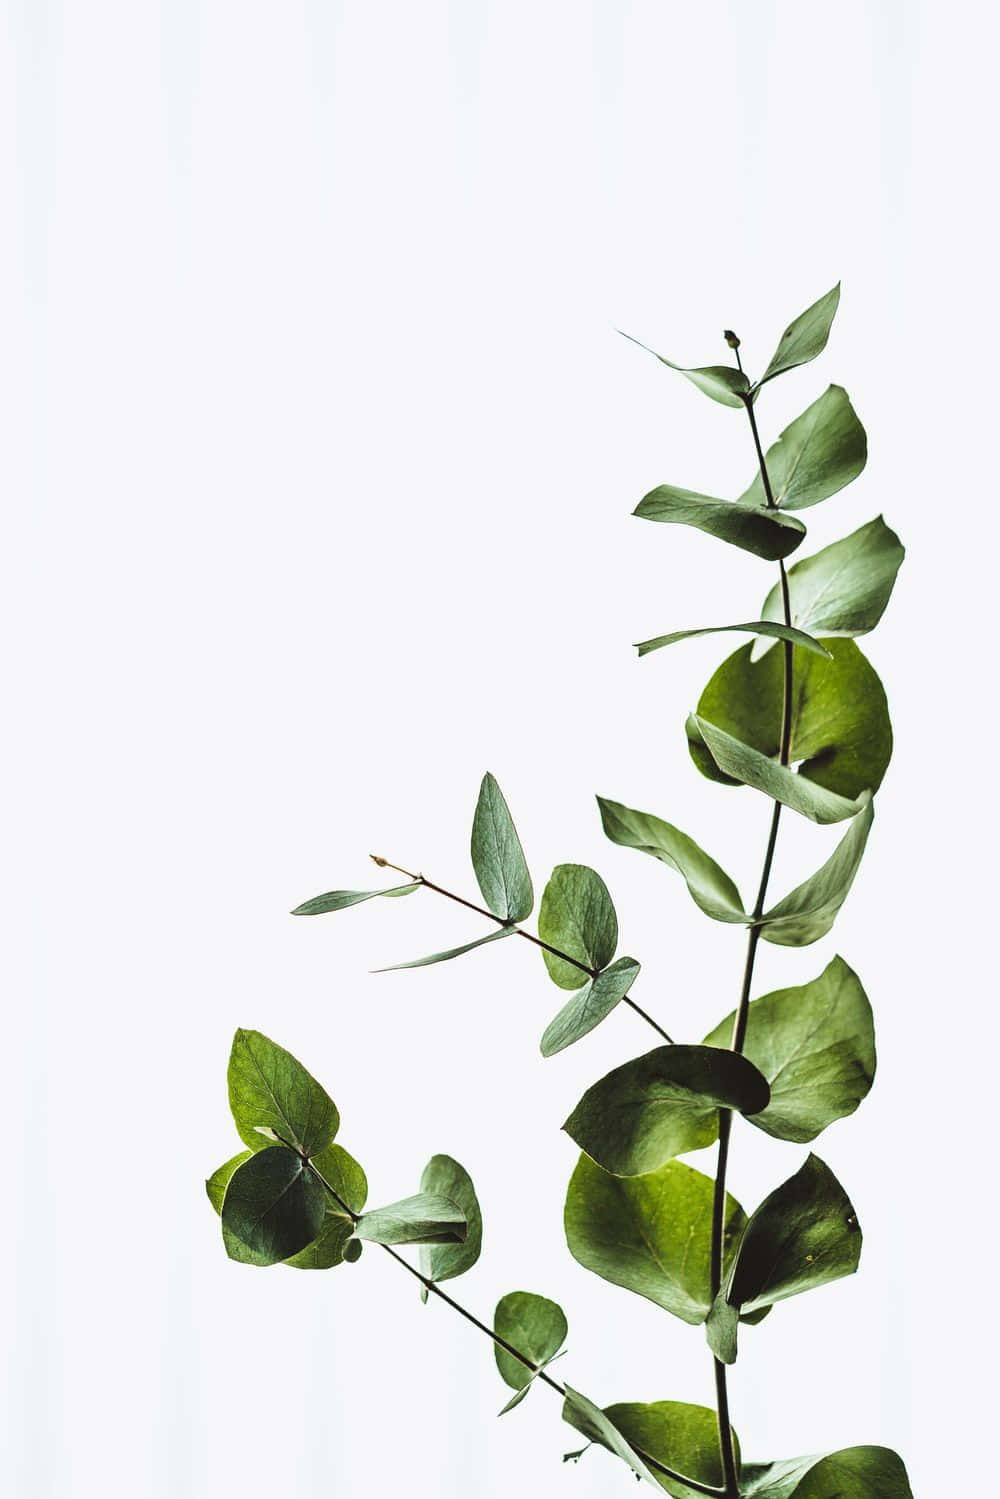 Enjoy Nature's Beauty with a Minimalist Plant